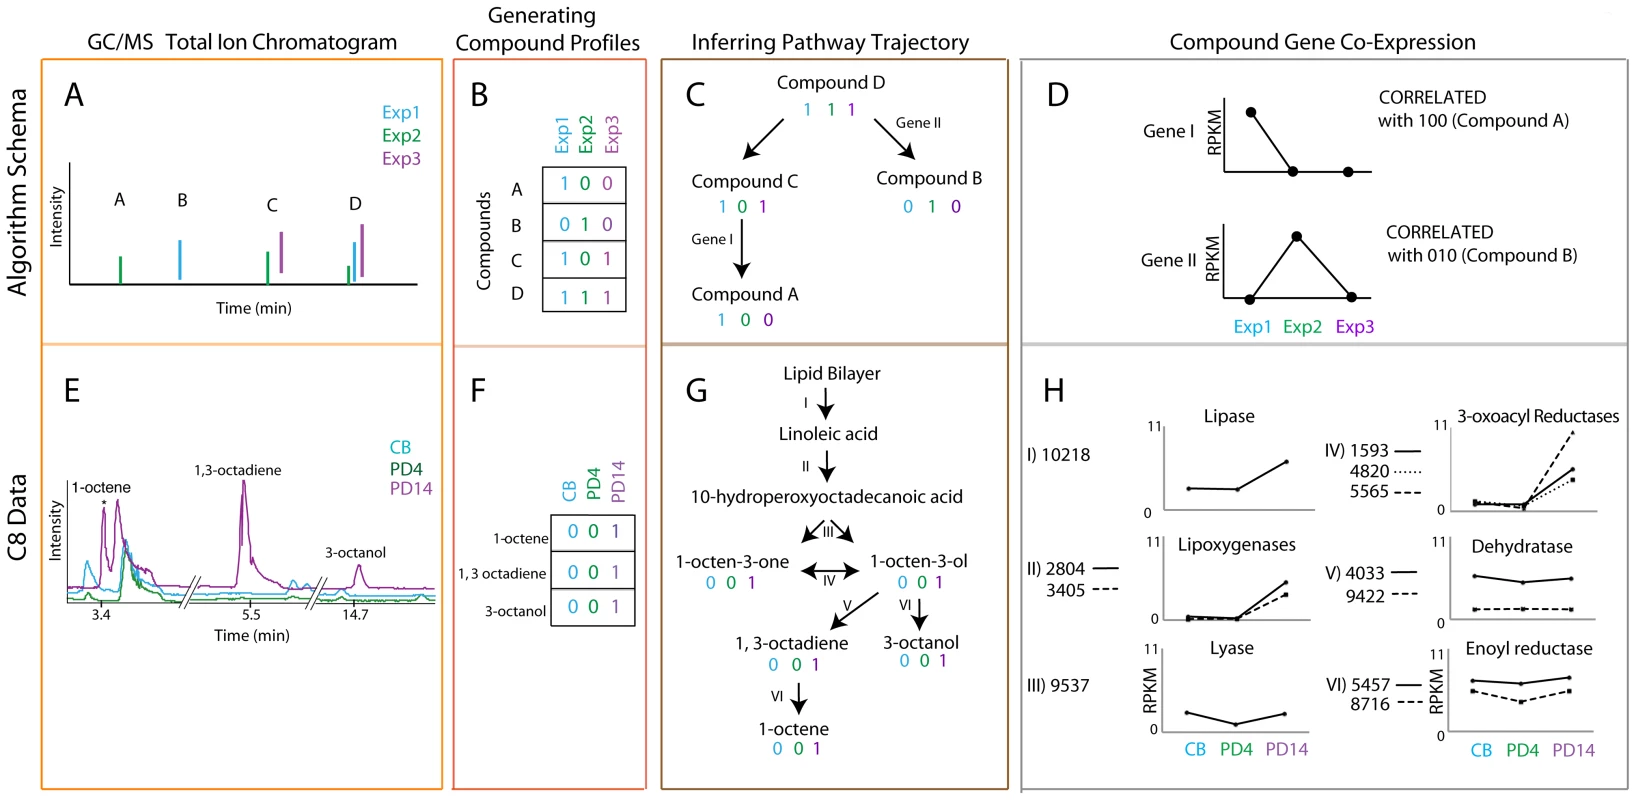 Coupled transcriptomics and metabolomics to generate pathway predictions.